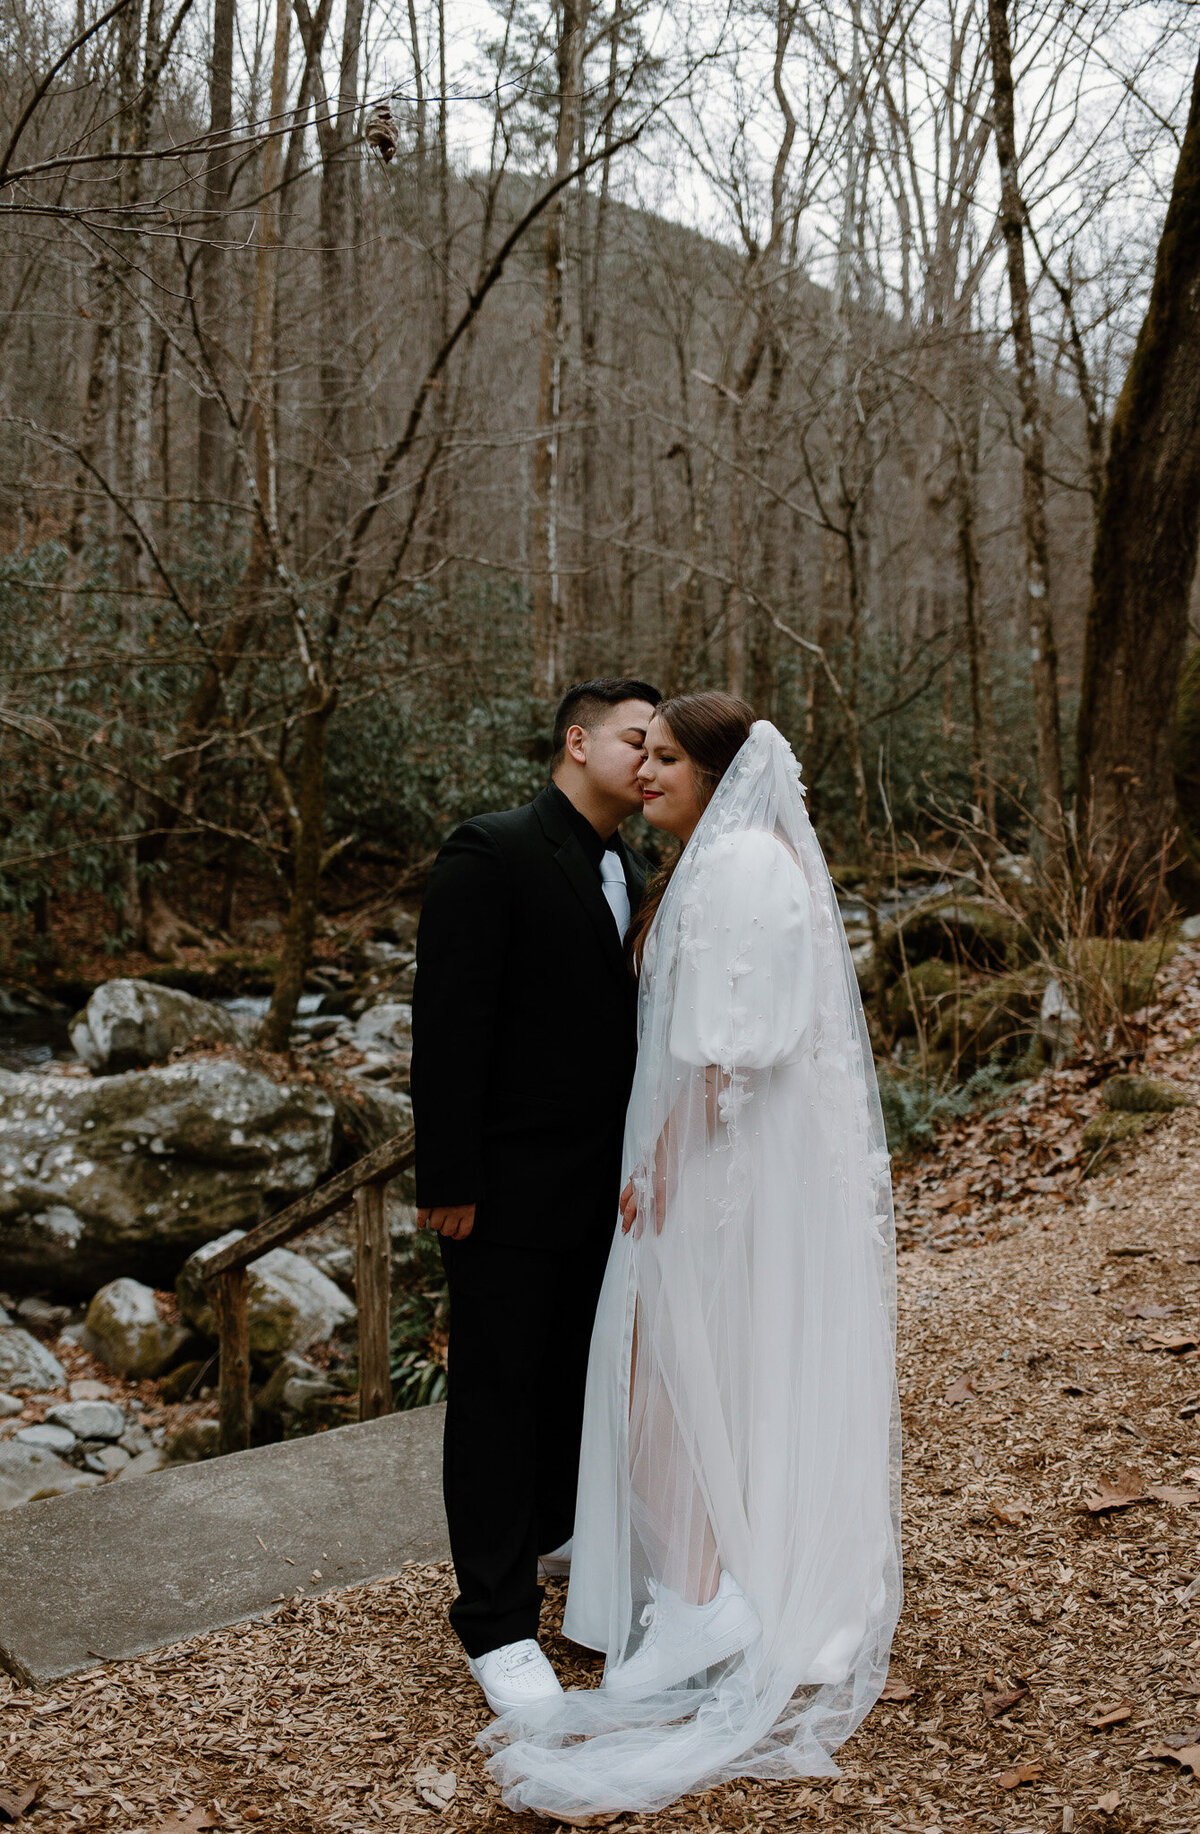 Intimate bride and groom portraits at their Smoky Mountain winter elopement.